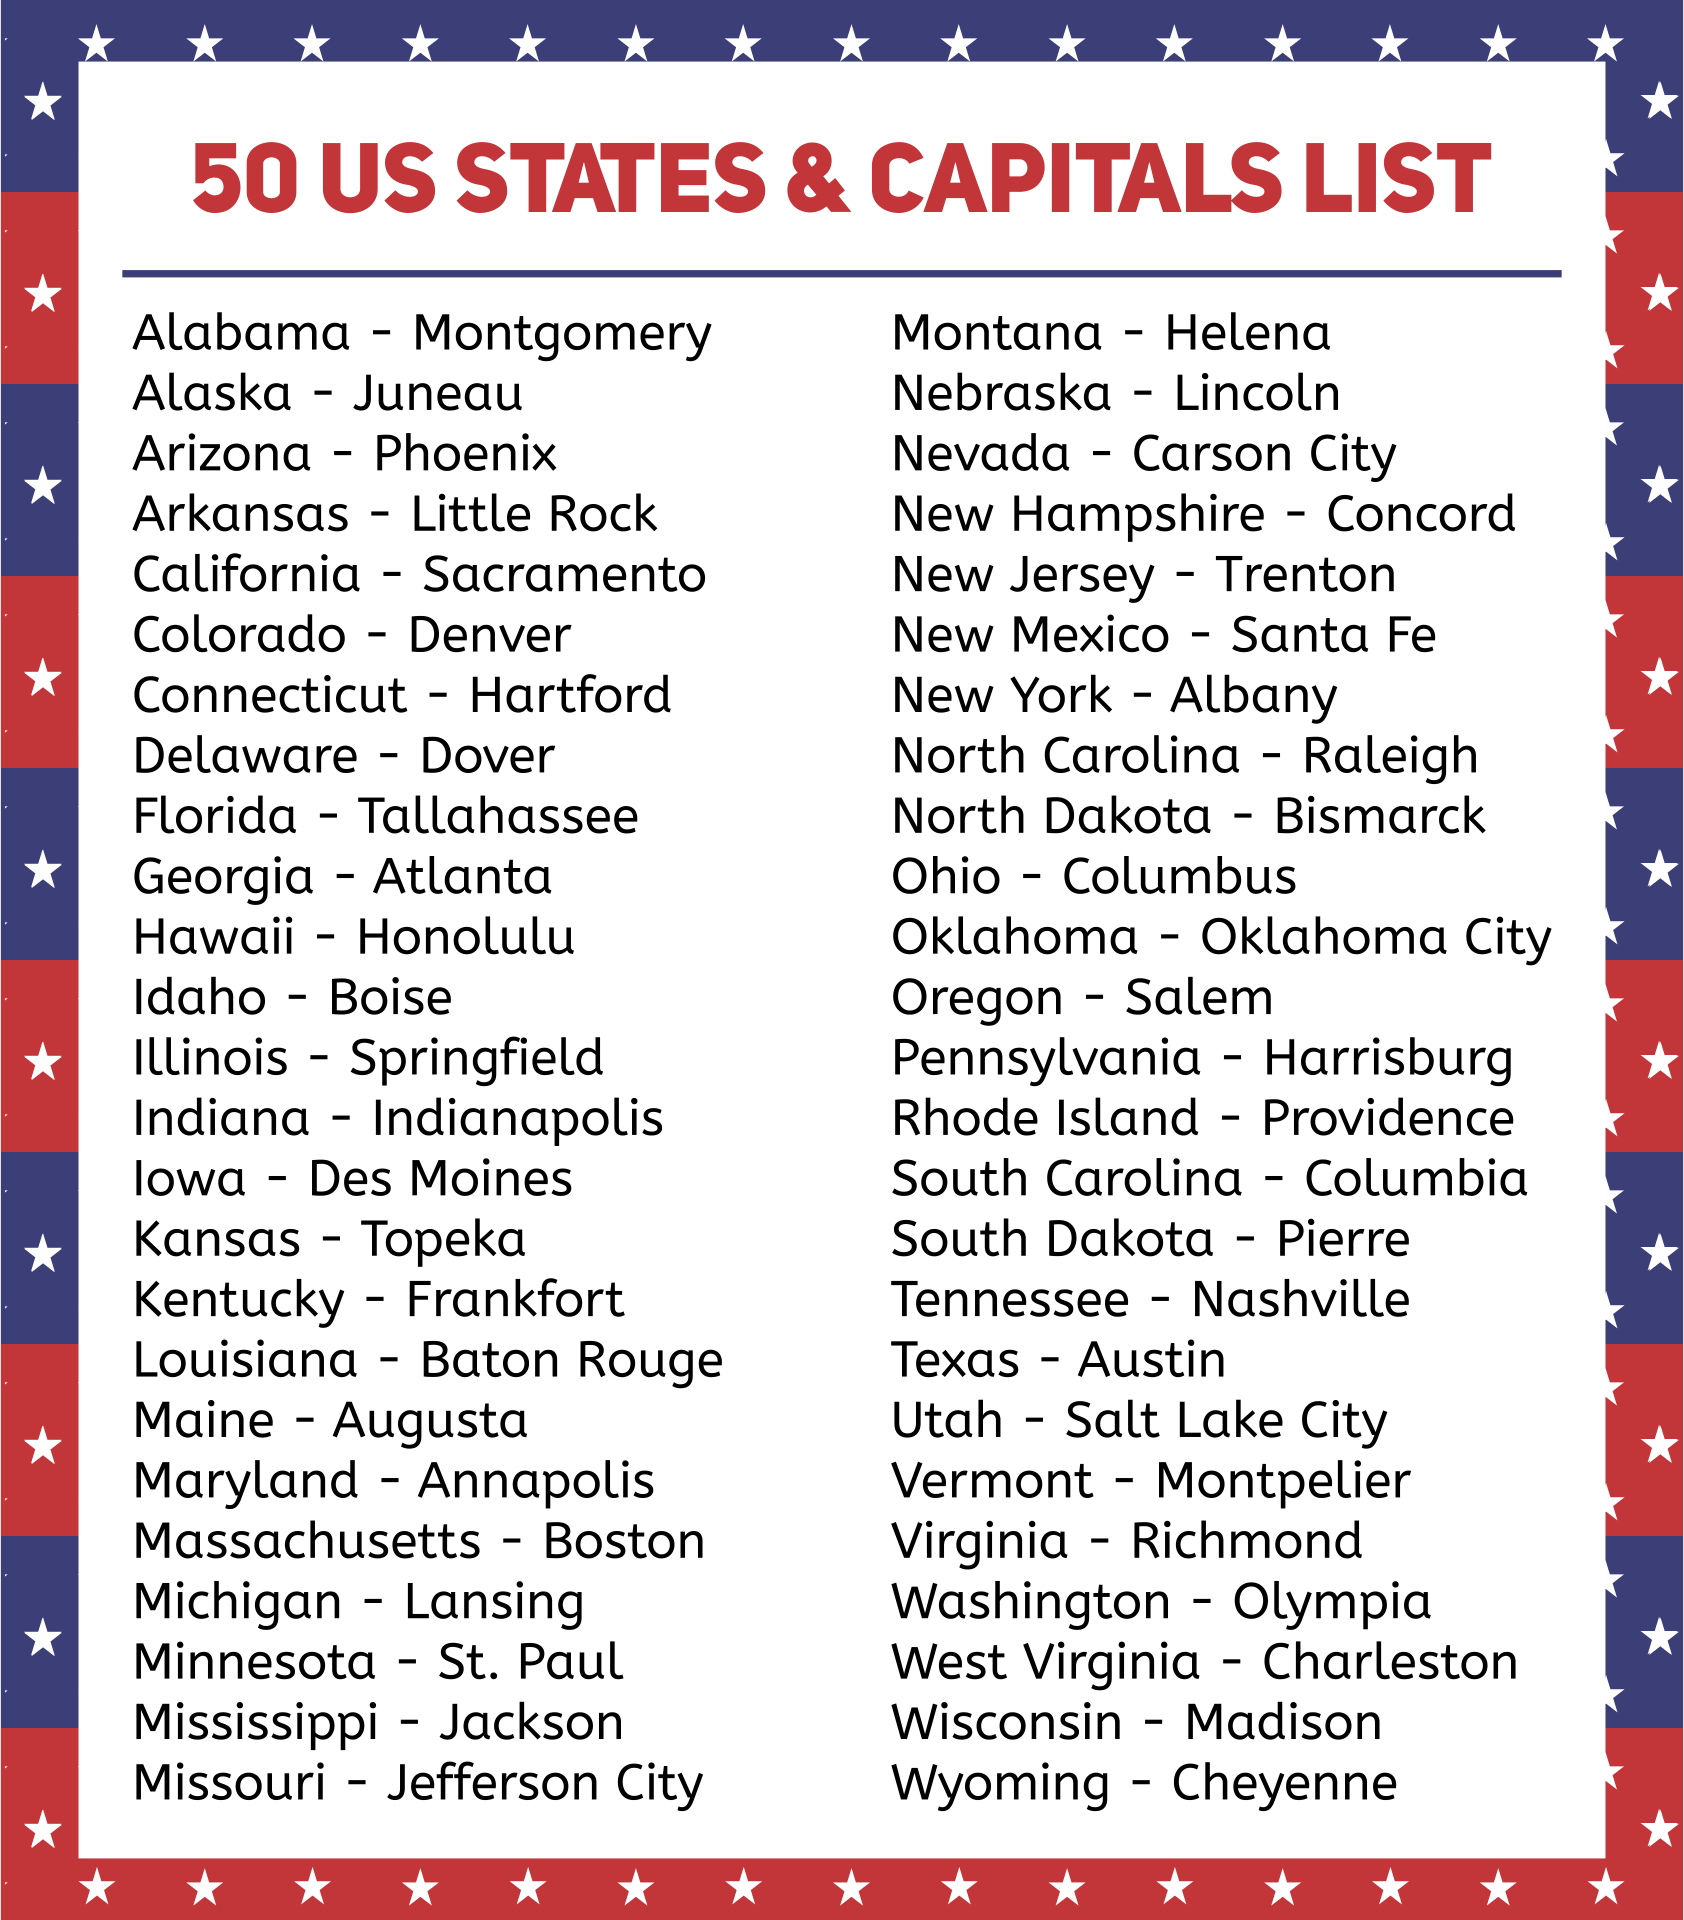 10 Best Us State Capitals List Printable